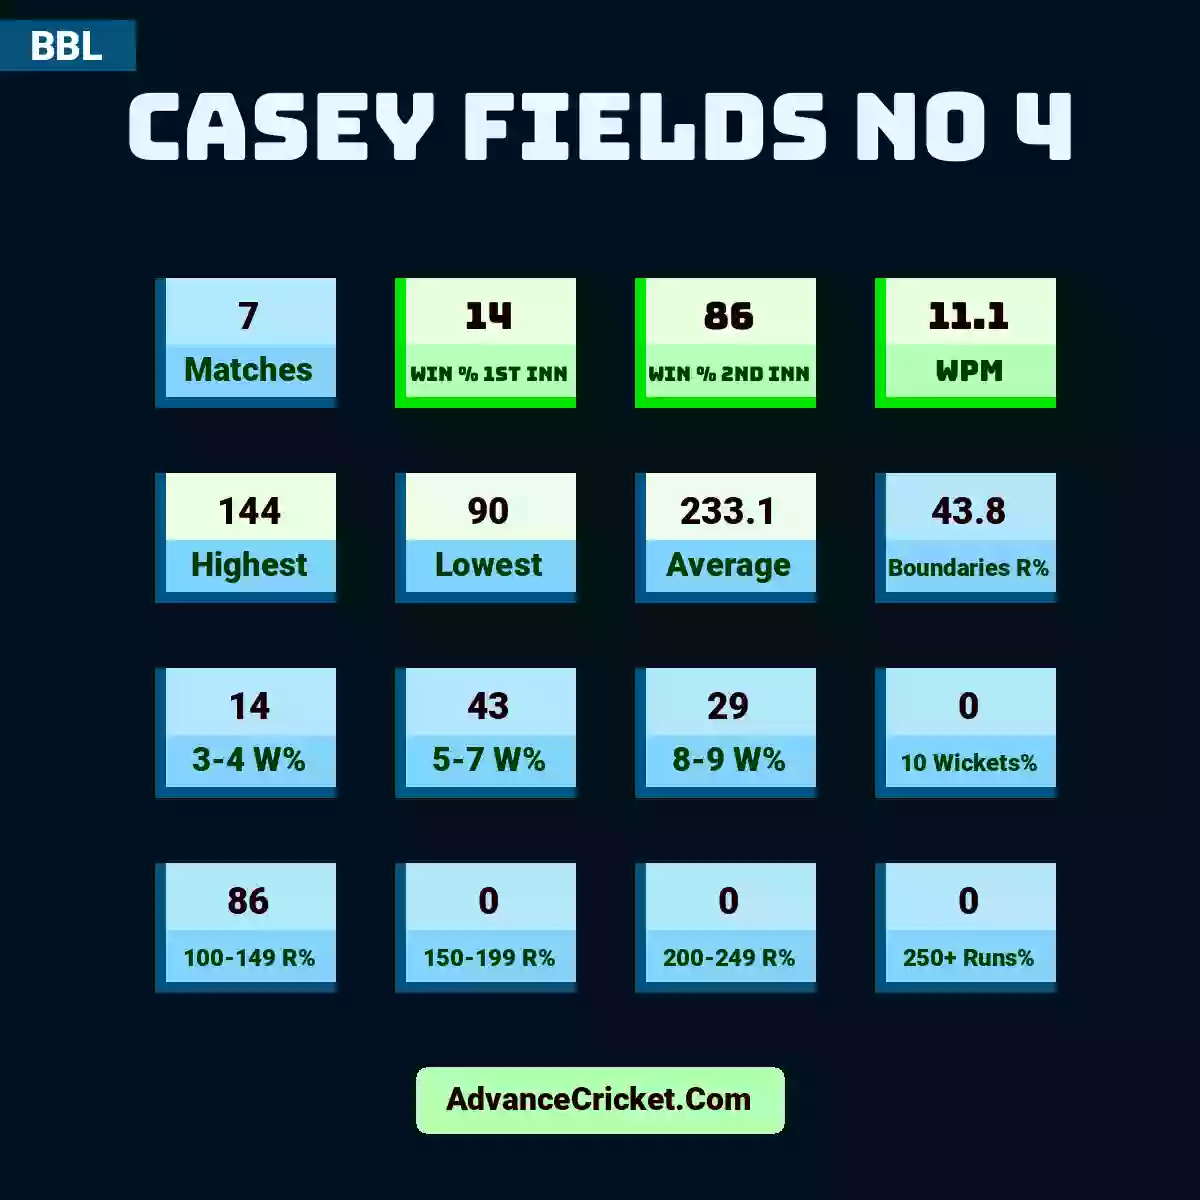 Image showing Casey Fields No 4 with Matches: 7, Win % 1st Inn: 14, Win % 2nd Inn: 86, WPM: 11.1, Highest: 144, Lowest: 90, Average: 233.1, Boundaries R%: 43.8, 3-4 W%: 14, 5-7 W%: 43, 8-9 W%: 29, 10 Wickets%: 0, 100-149 R%: 86, 150-199 R%: 0, 200-249 R%: 0, 250+ Runs%: 0.